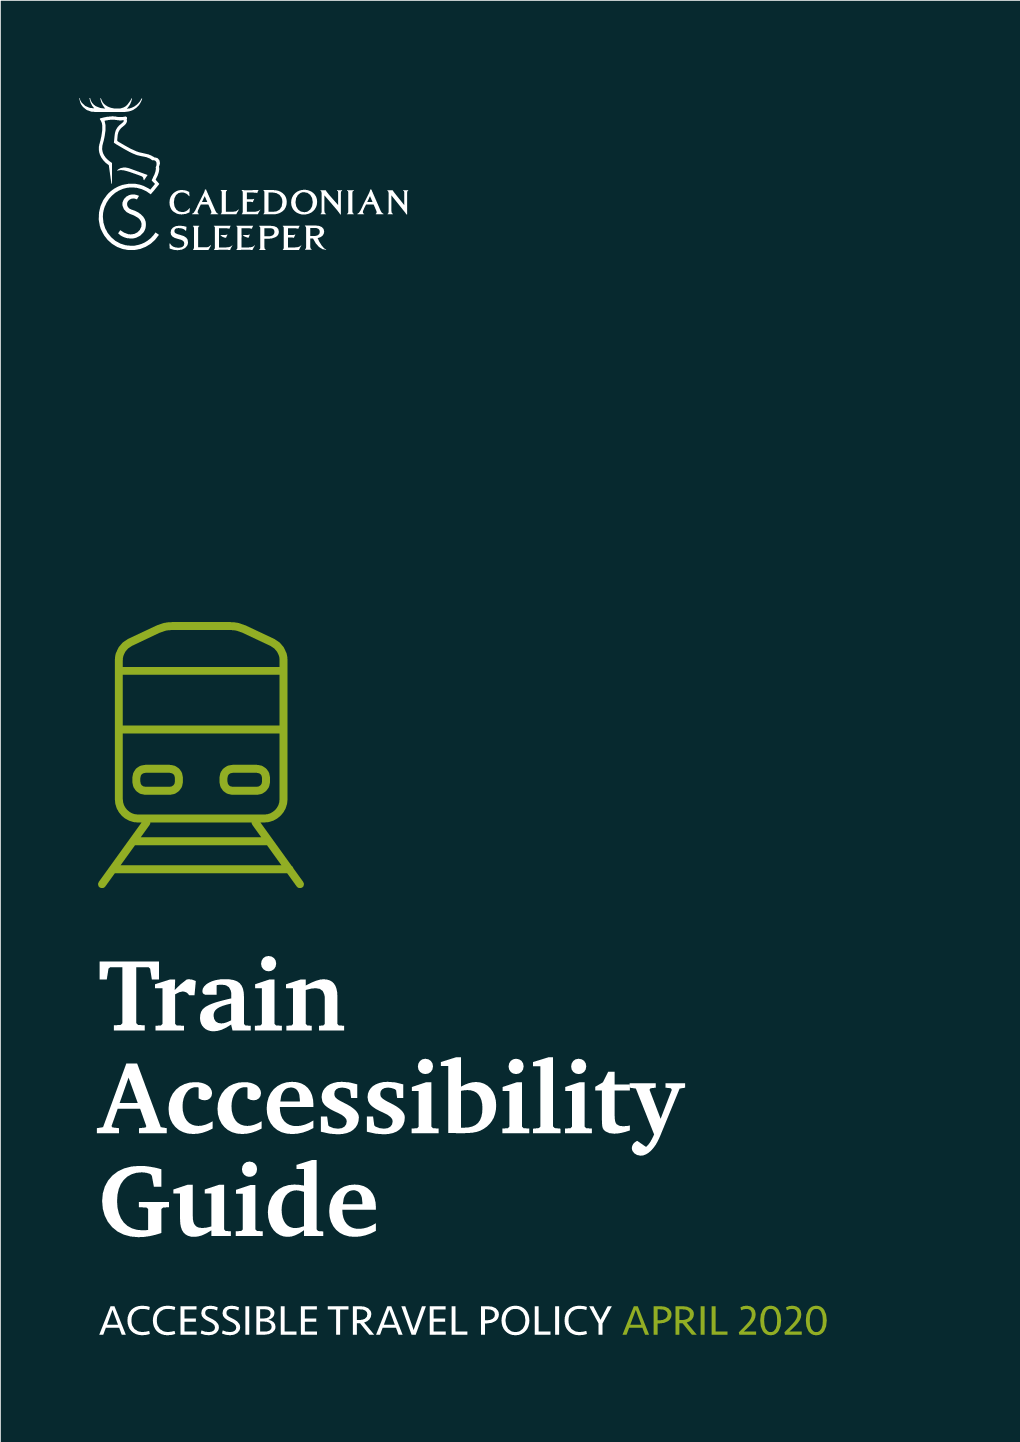 Train Accessibility Guide ACCESSIBLE TRAVEL POLICY APRIL 2020 Making Rail Accessible: Helping Older and Disabled Passengers